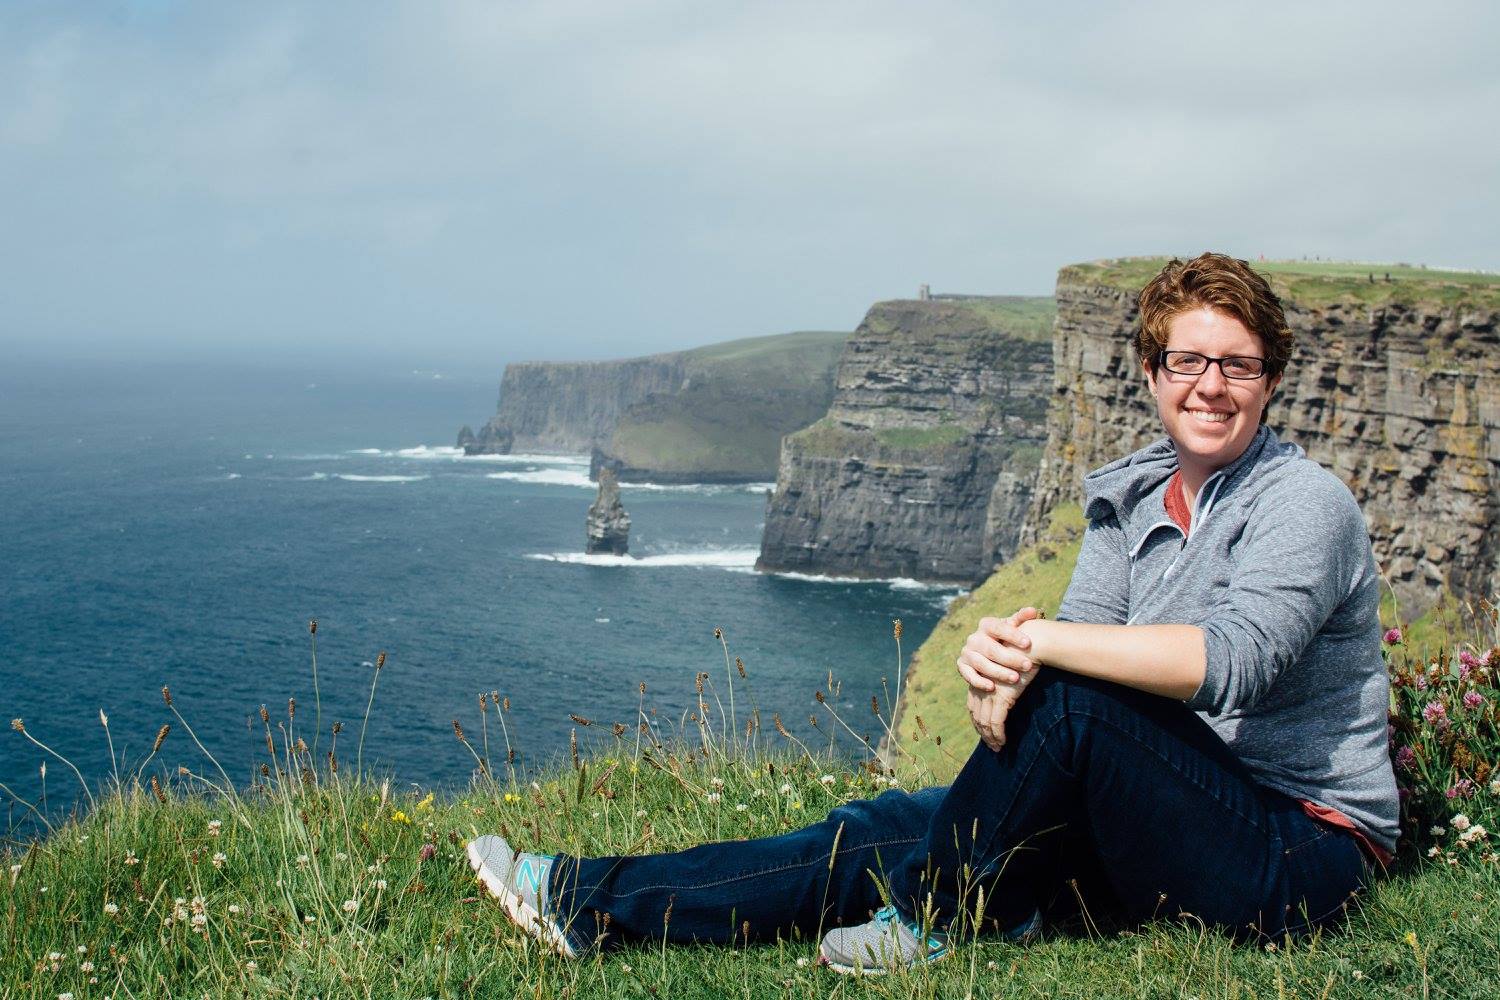 Taryn Peterson on the Cliffs of Moher in Ireland